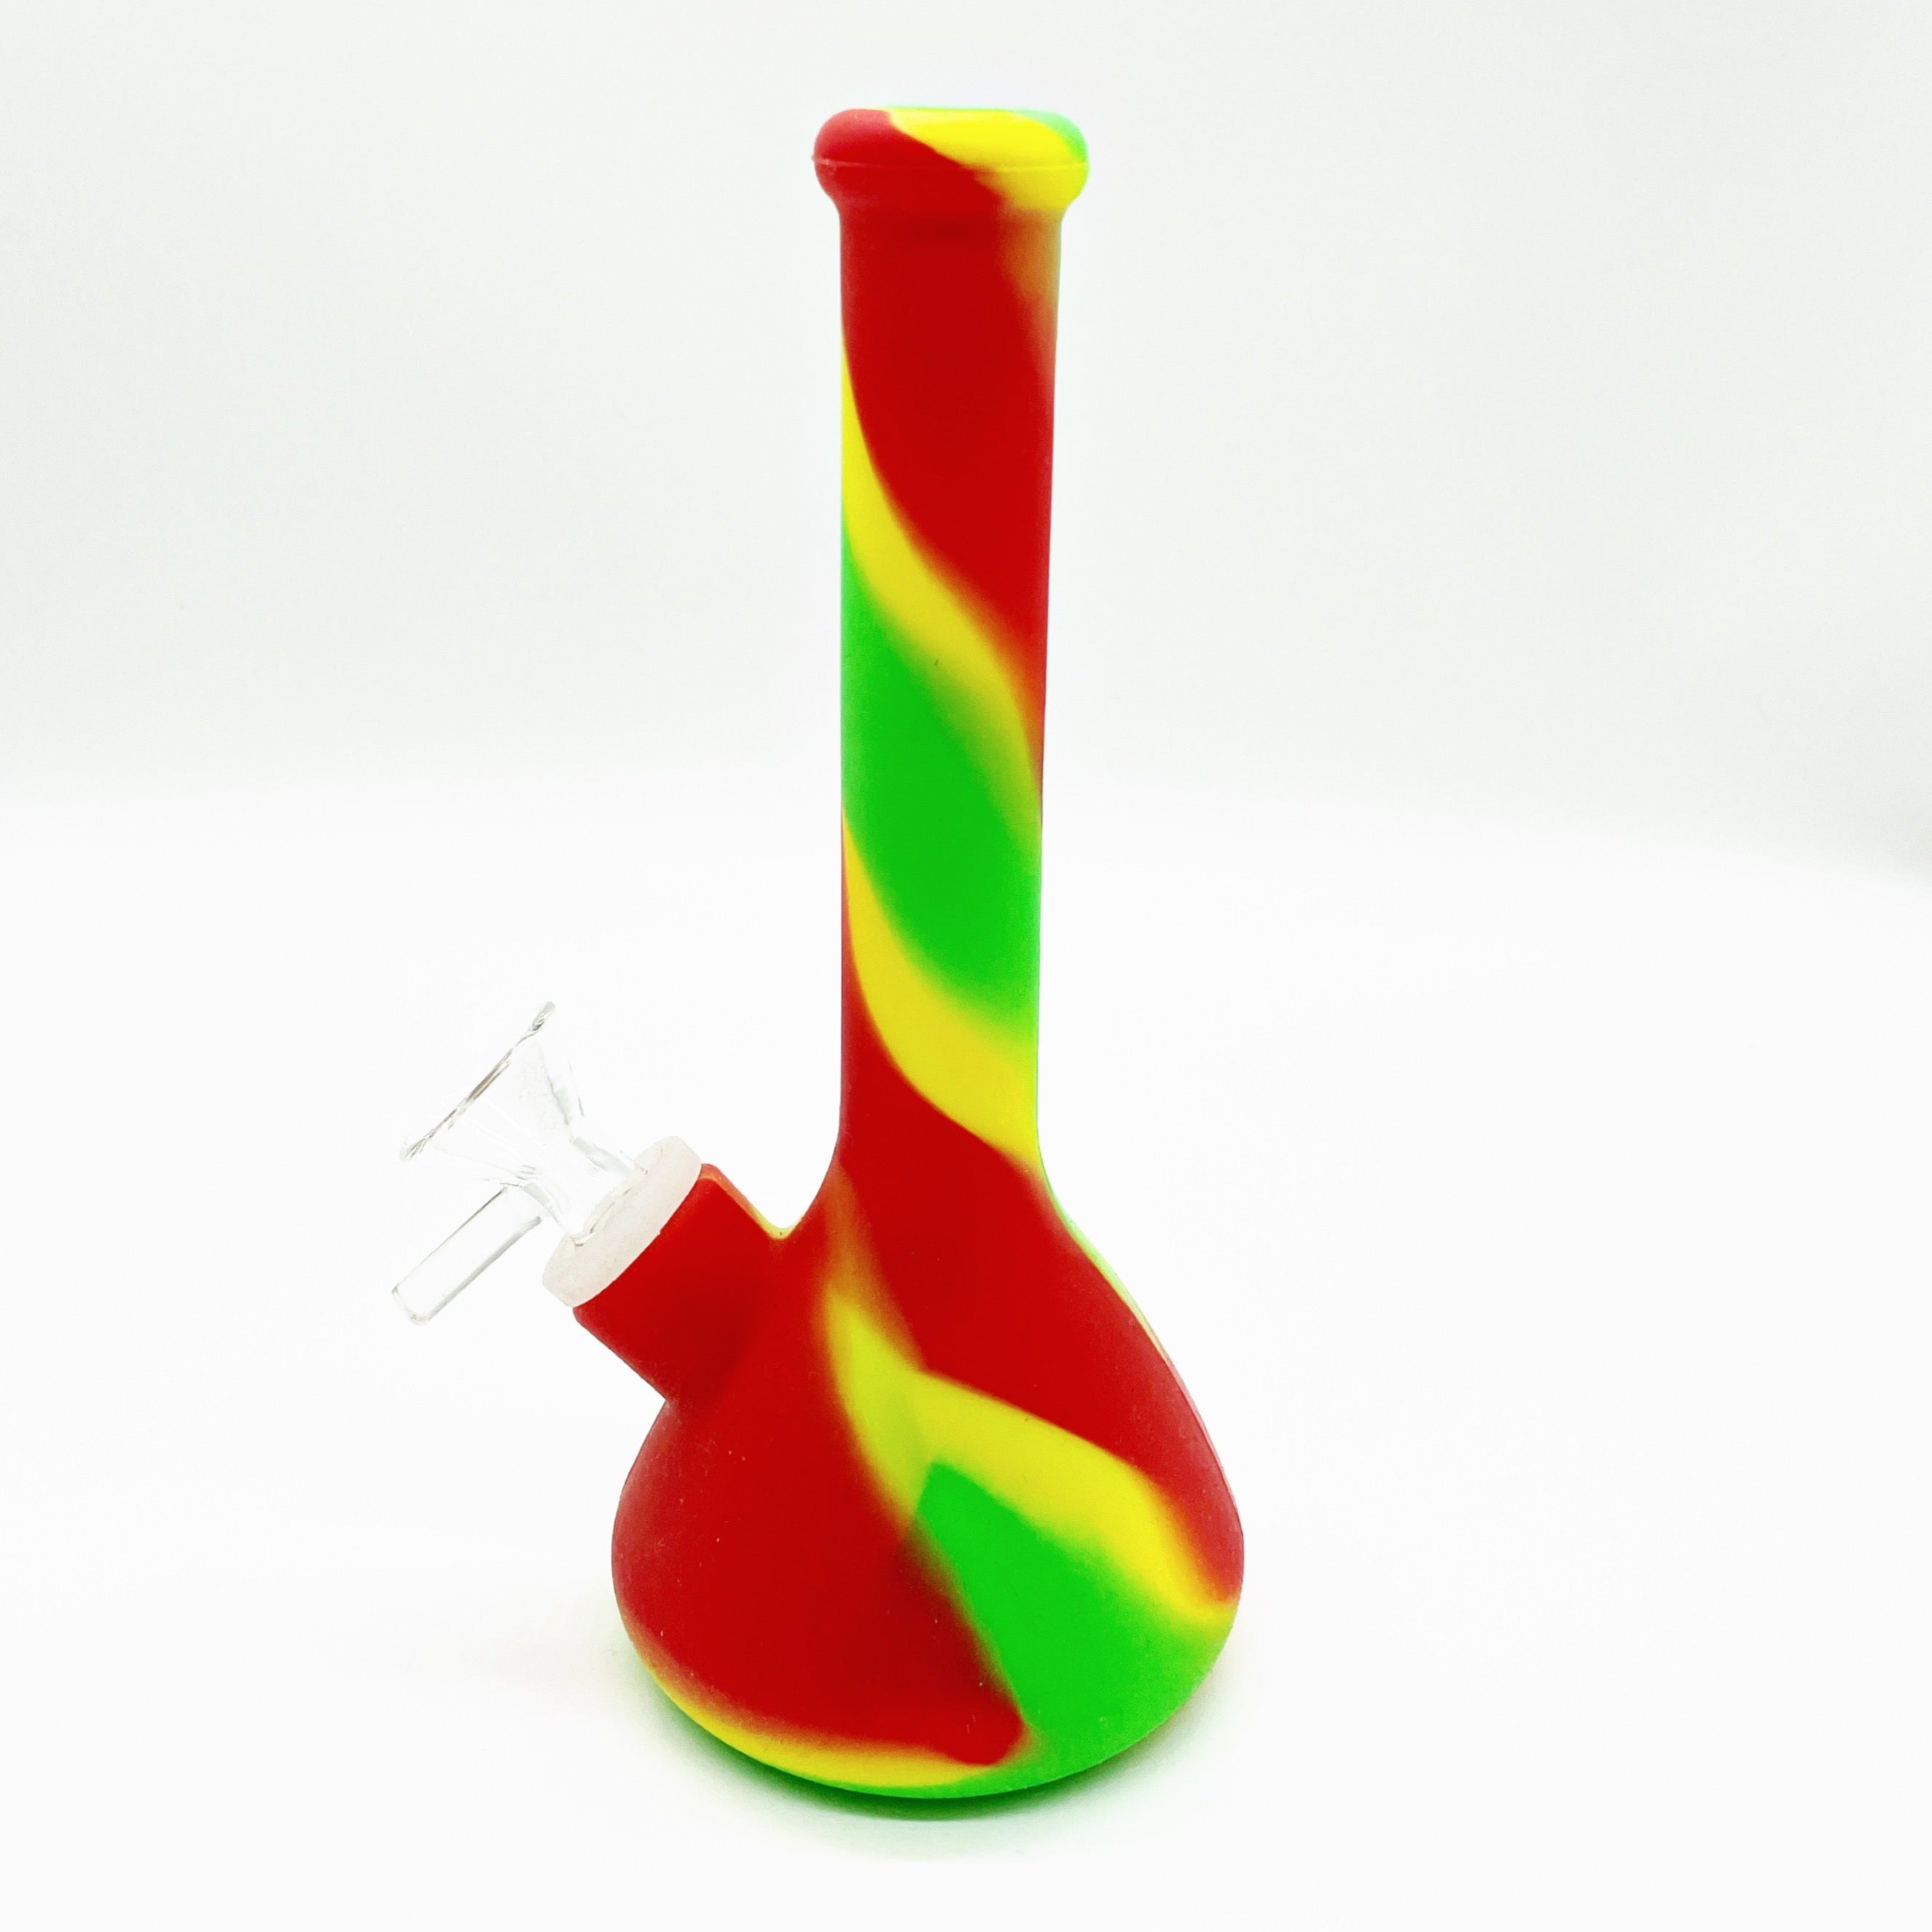 7" Rasta Colored Silicone Waterpipe with Glass Bowl Wholesale